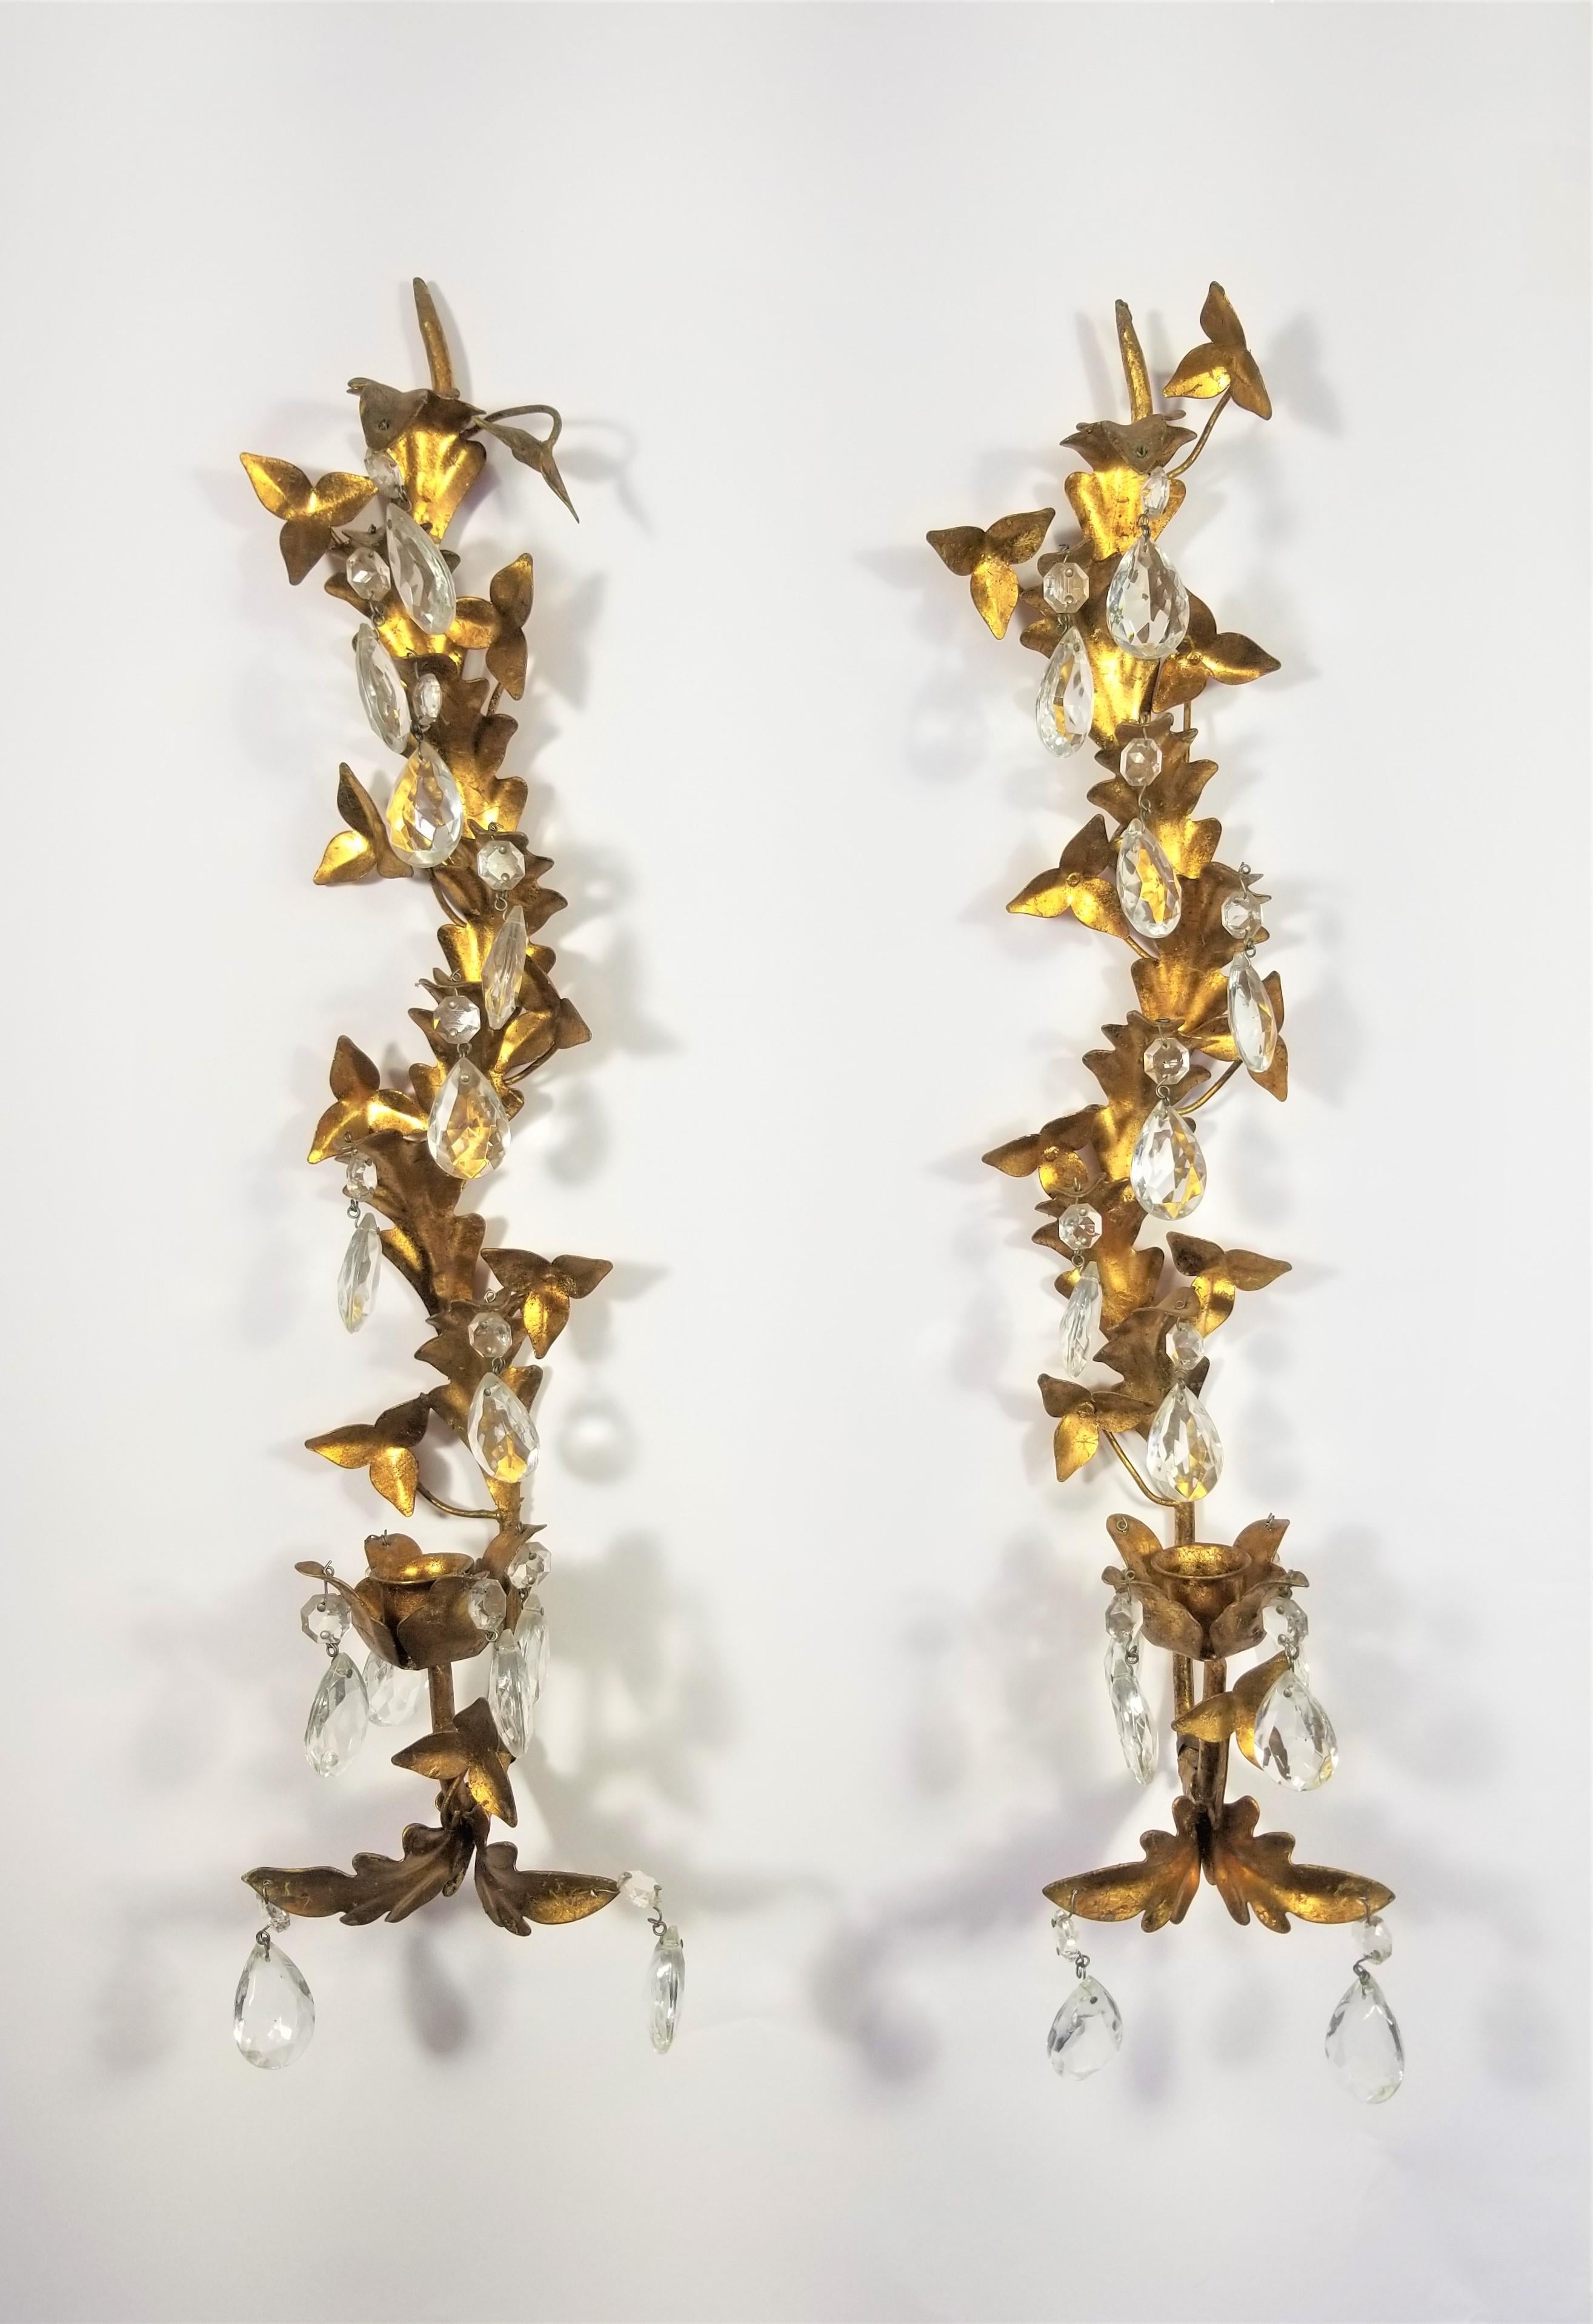 Pair of Mid Century 1950s Gilded Sconces with crystals.. One candleholder on each. Both retain metal marking tag made in Italy. 